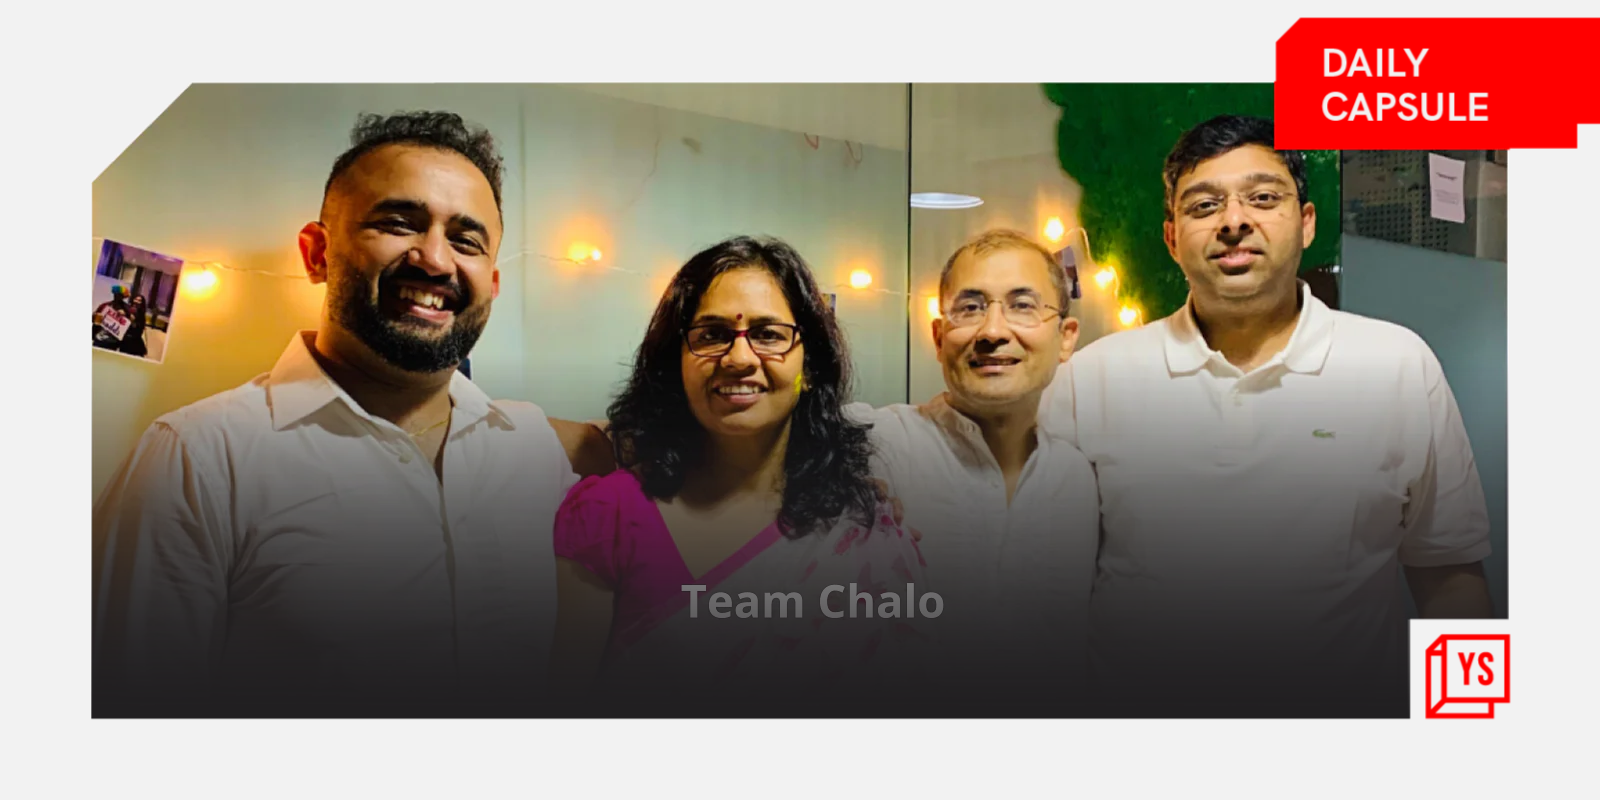 Mobility startup ﻿Chalo’s turning point